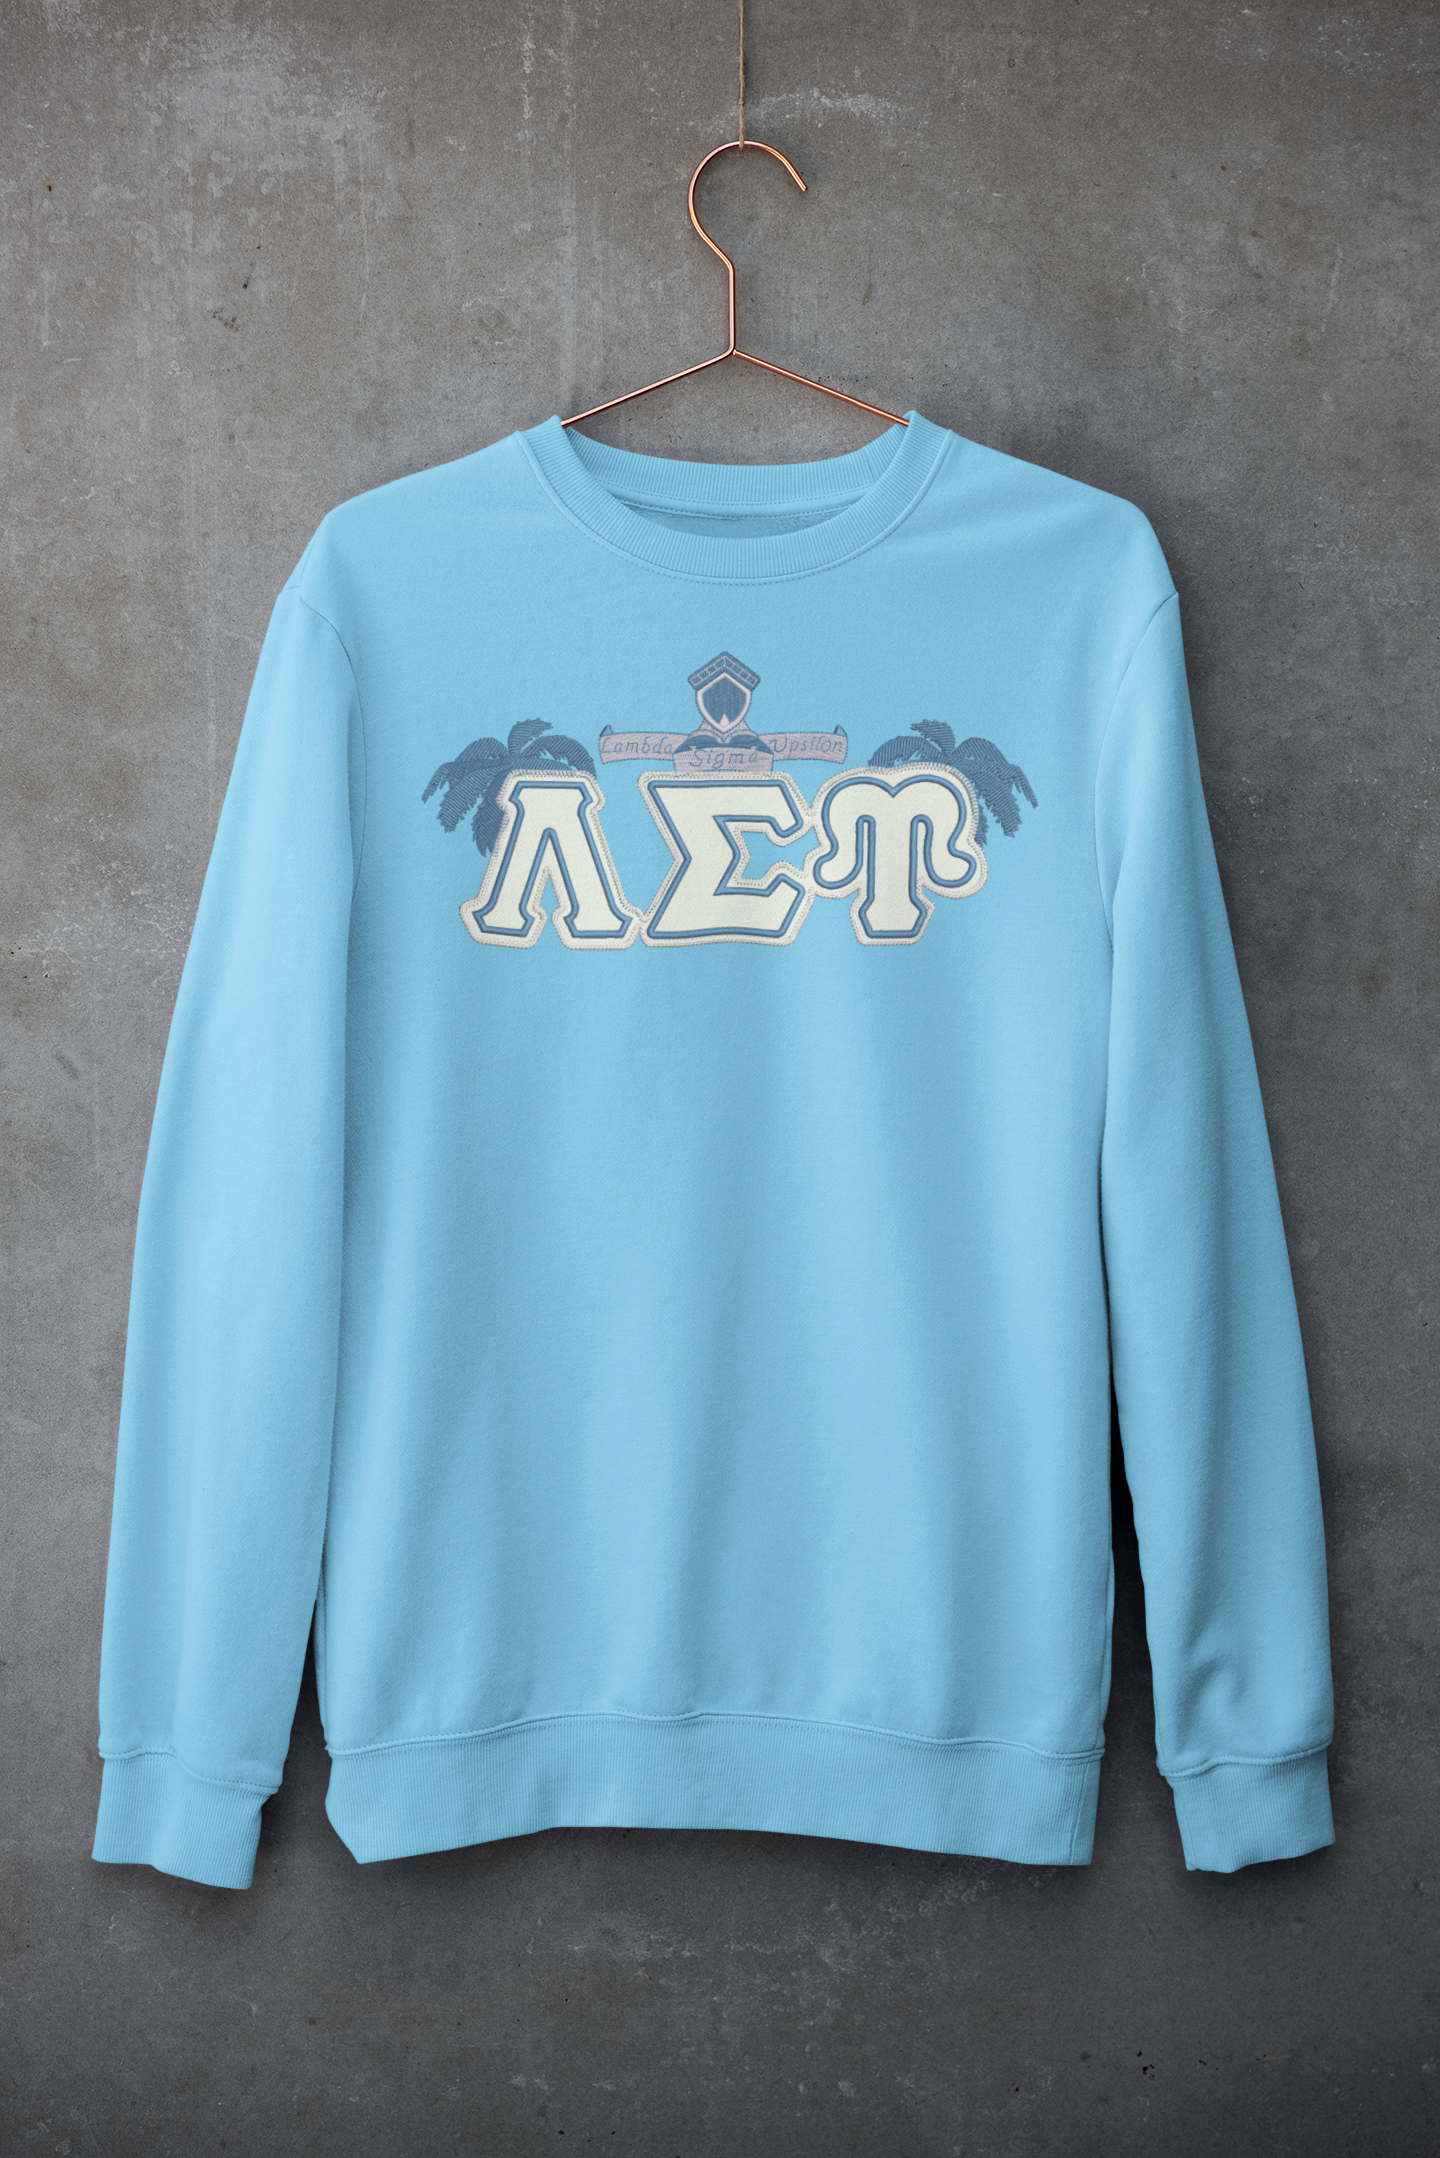 LSU Palms & Shield Crew Neck in White, Black or Baby Blue